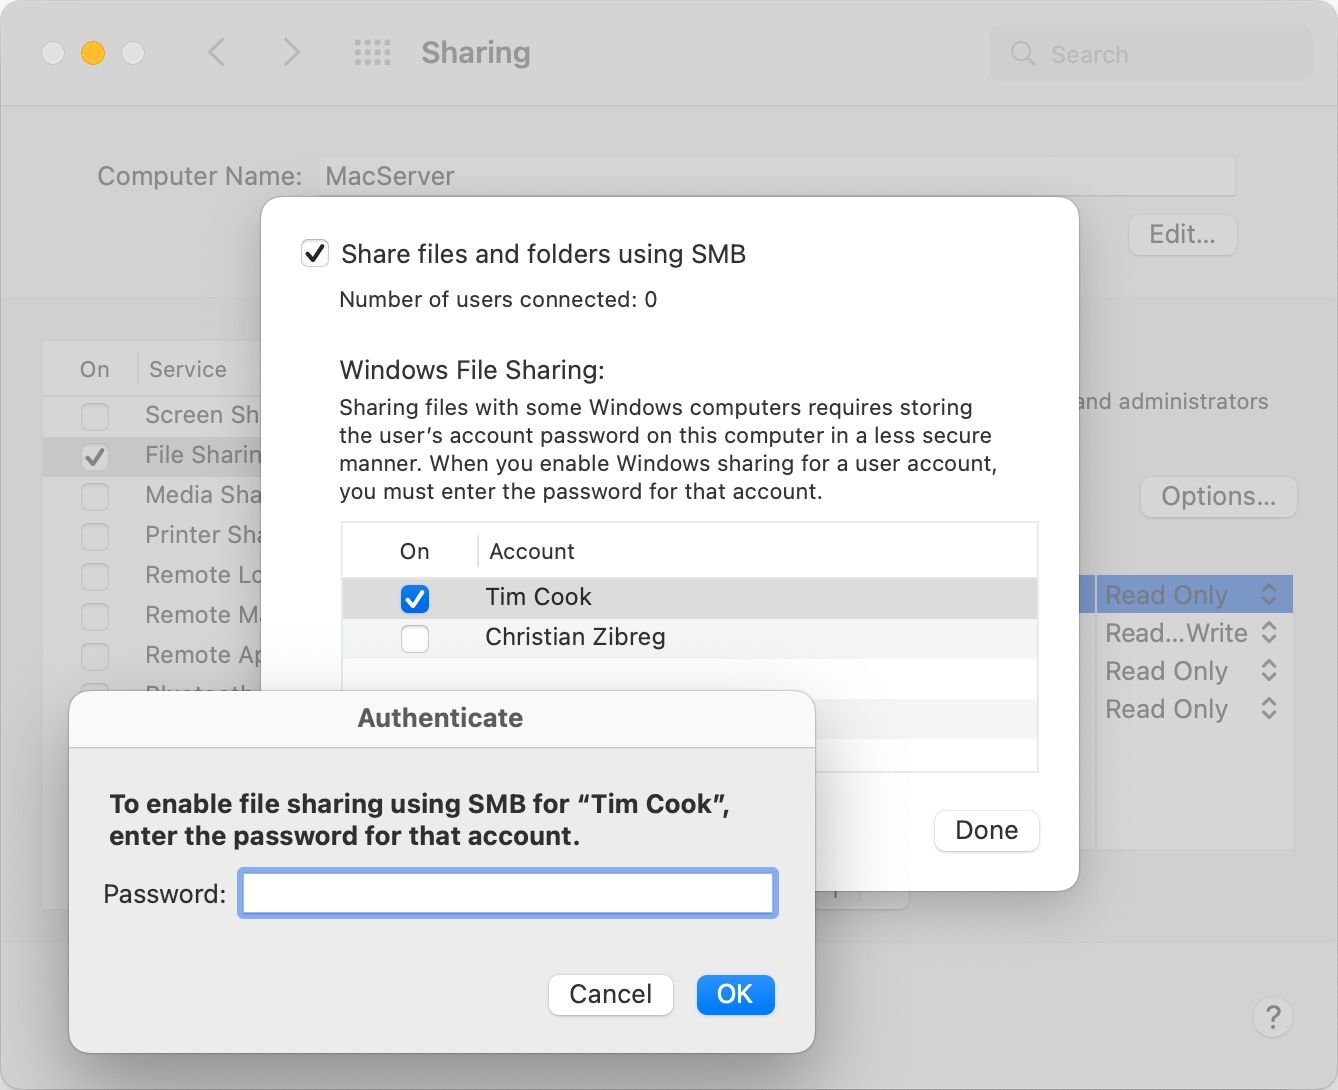 Authenticating a user for SMB Windows file sharing in System Preferences on macOS Monterey